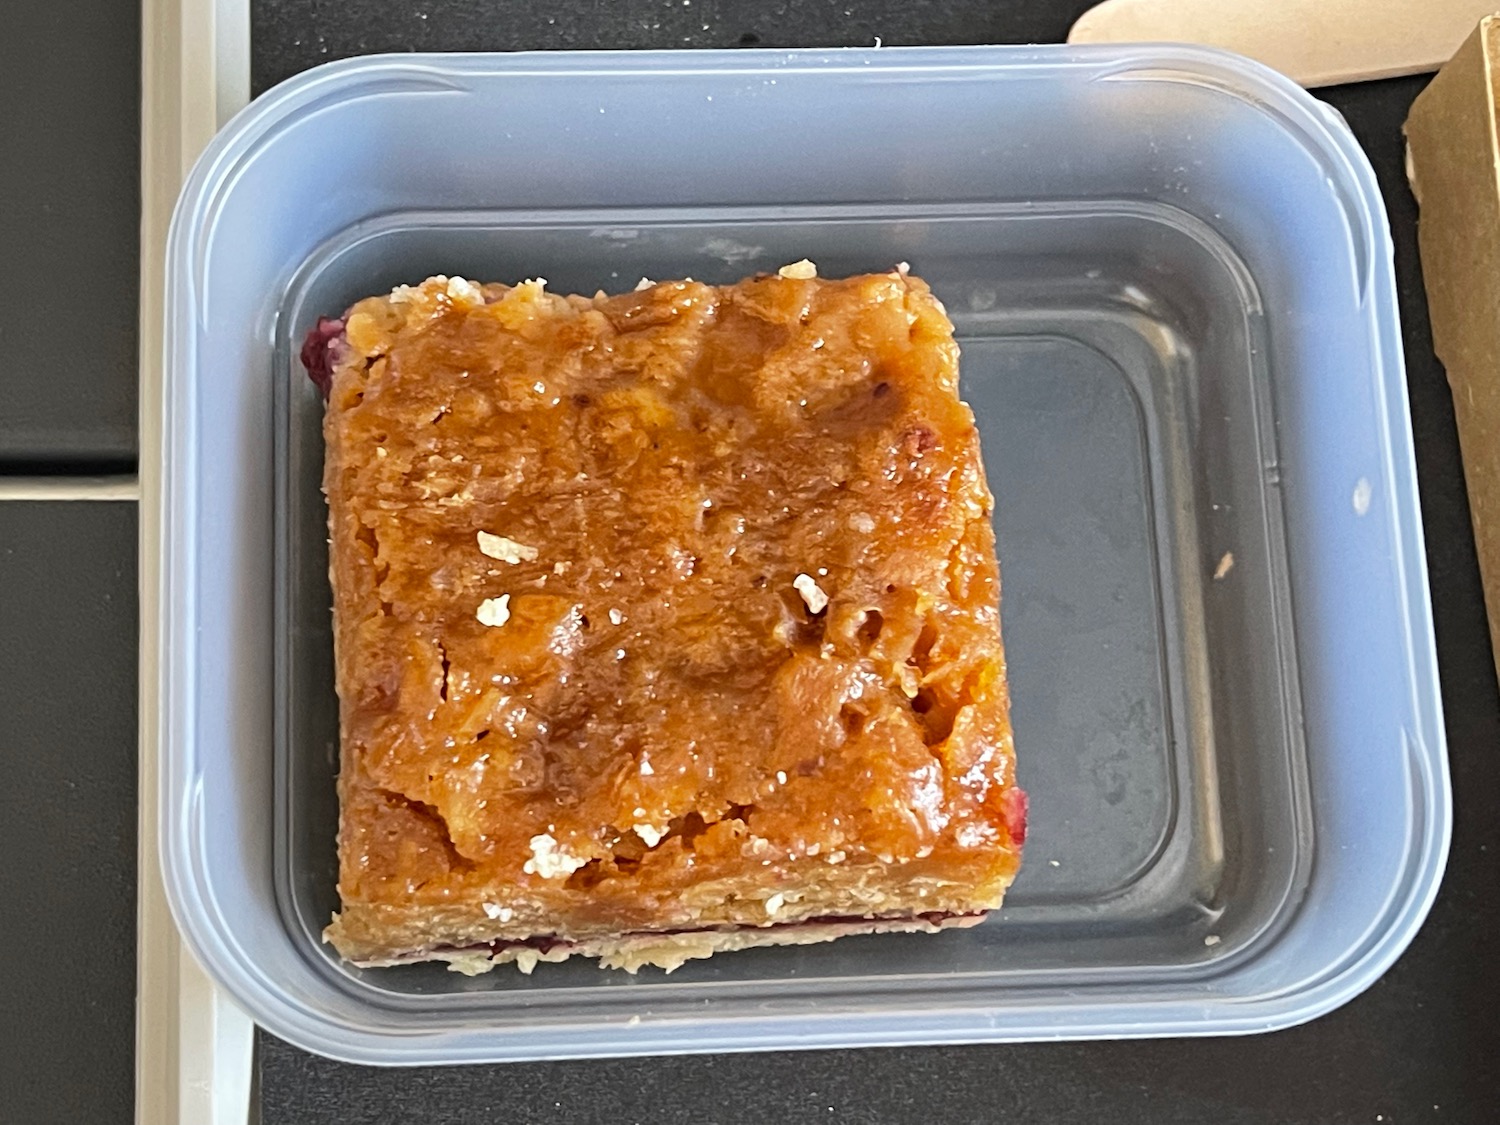 a square brown food in a plastic container